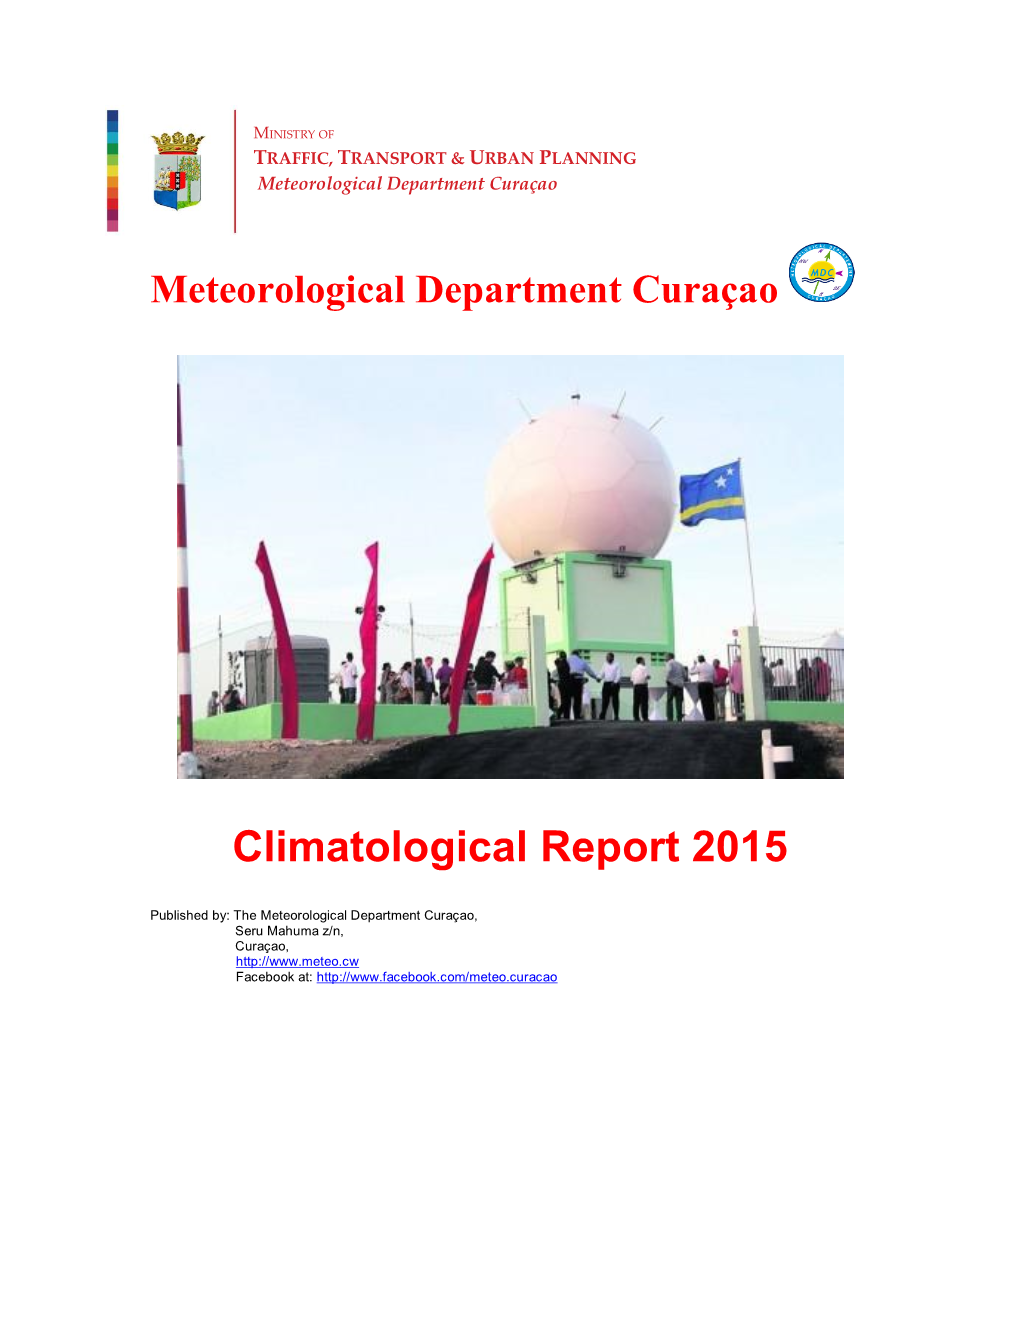 Climatological Report 2015